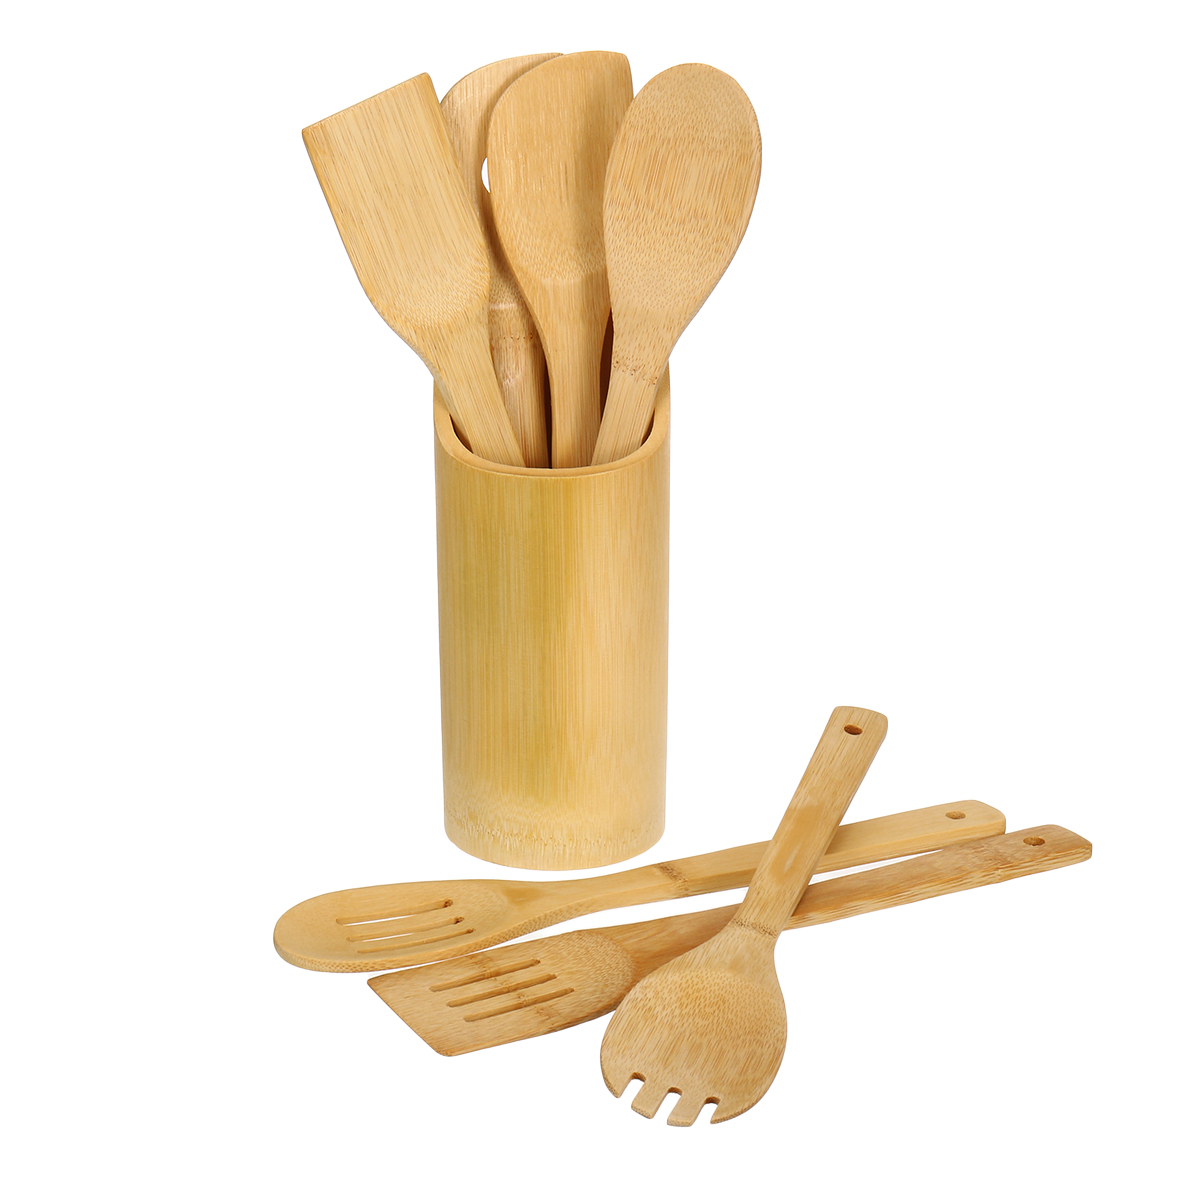 8PCS-Bamboo-Nonstick-Cooking-Utensils-Wooden-Spoons-and-Spatula-Utensil-Set-1680404-3